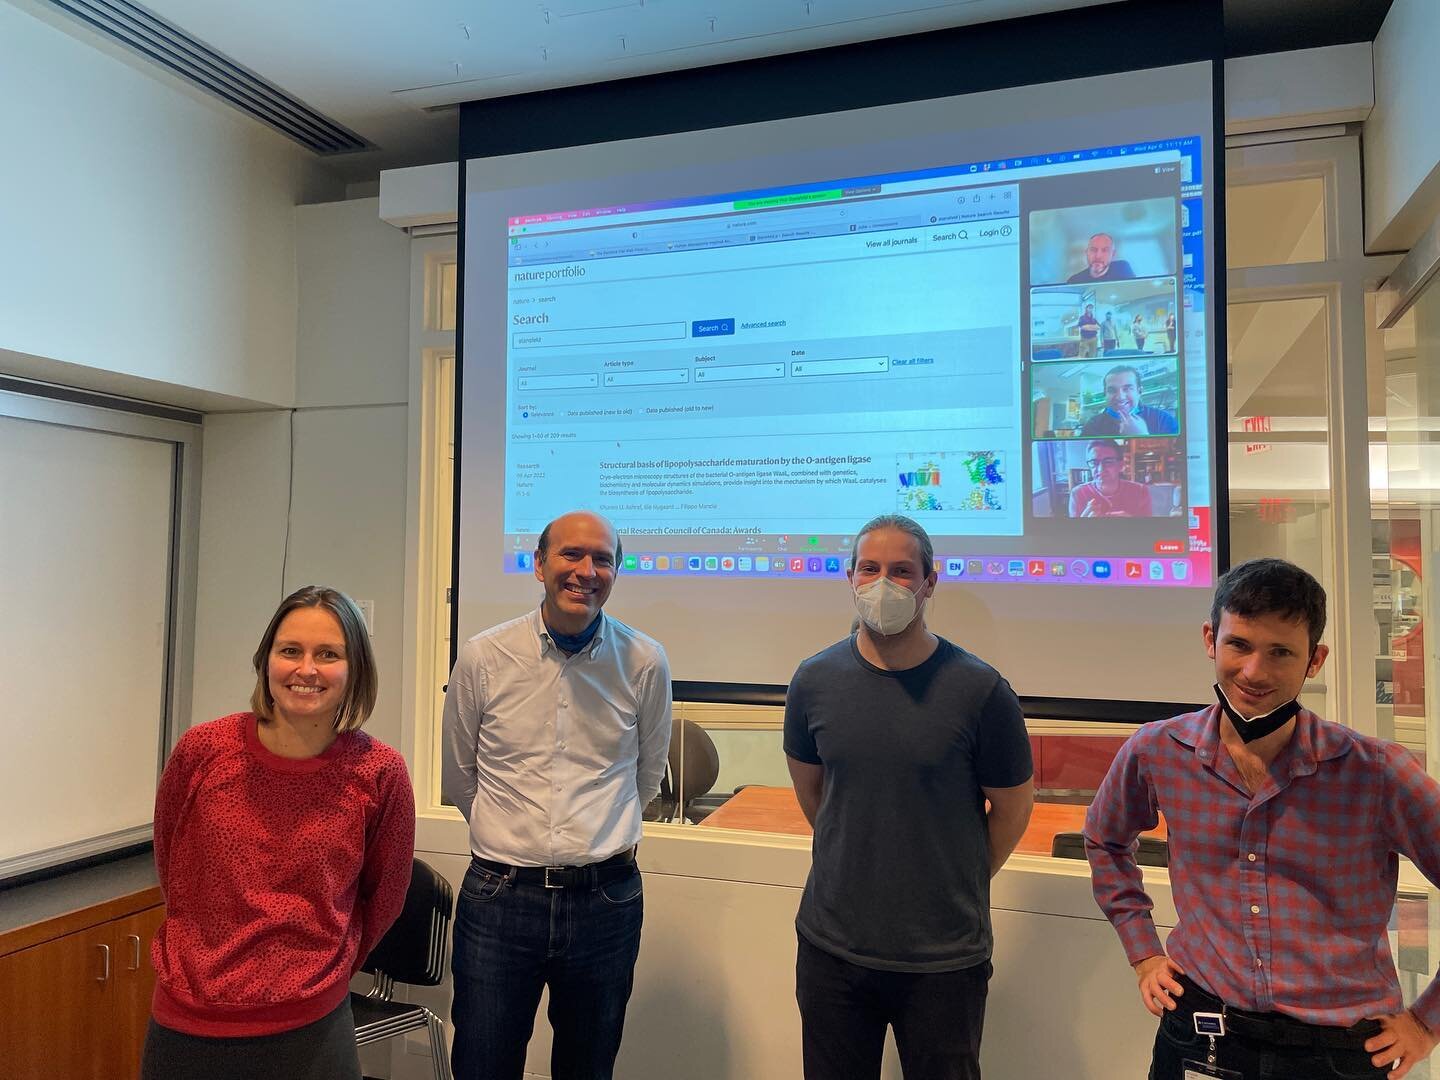 It&rsquo;s Nature publication day! Check out our structure of WaaL now available online! Congrats to first author Khuram and all coauthors!! Glad we could celebrate together via Zoom @rie_pigen23 @aerchethis @sabs9 @meagandufrisne @david.roper2 @olib